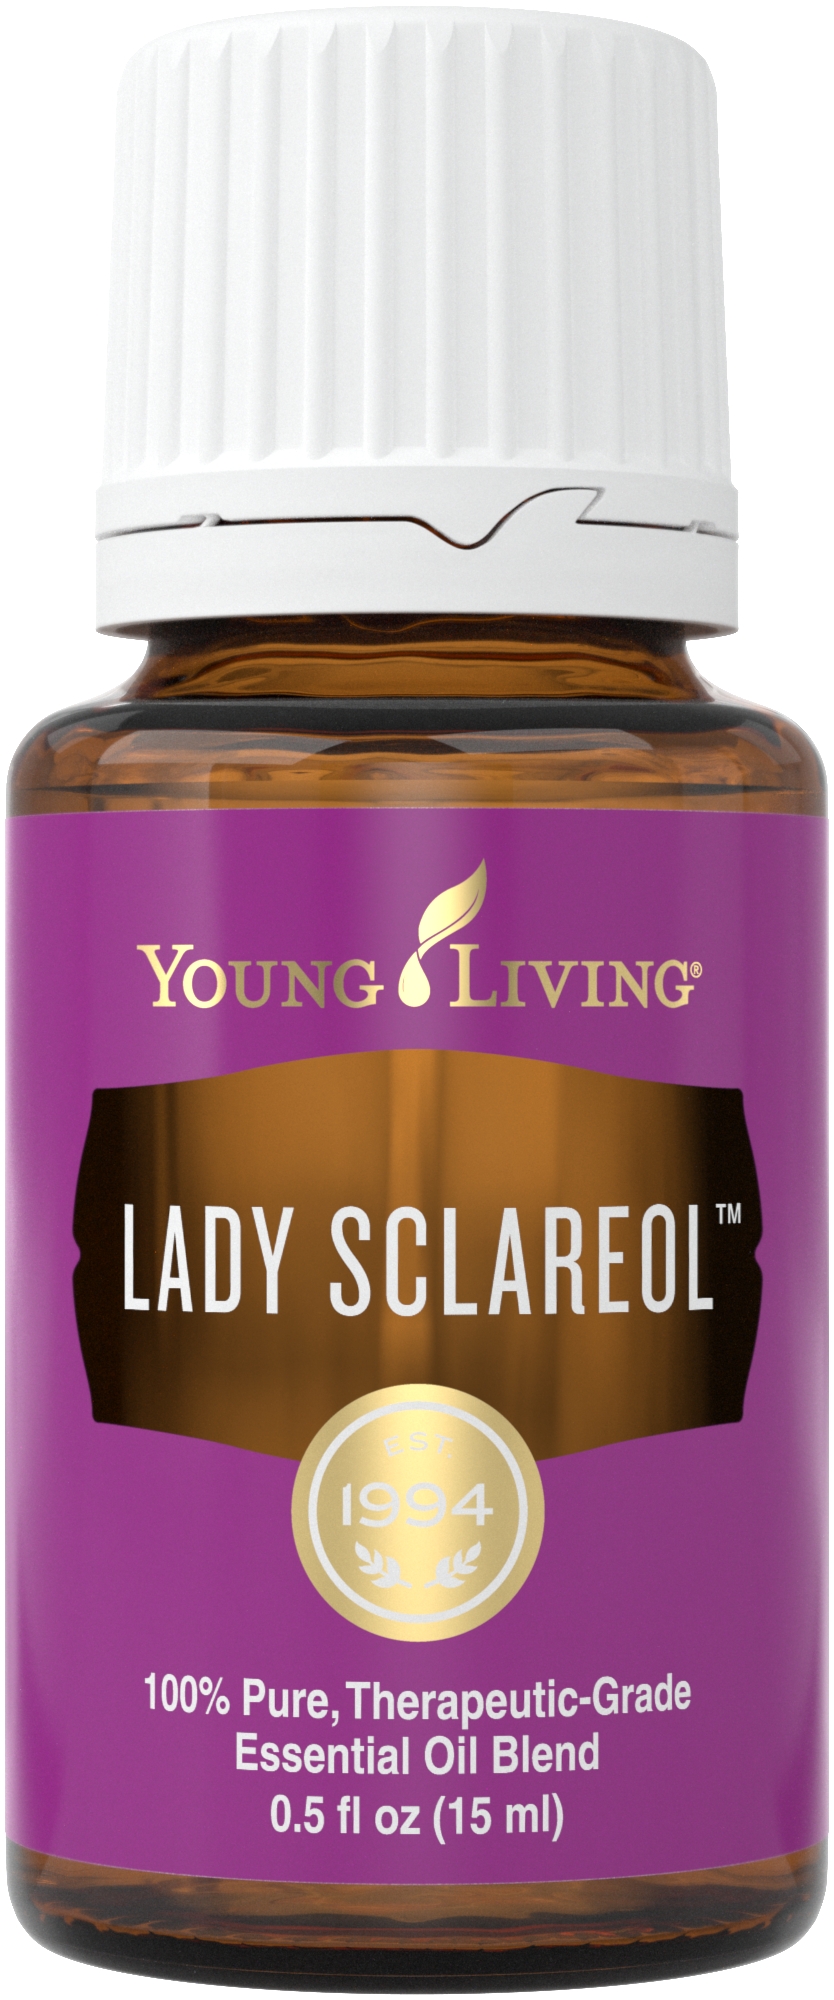 Lady Sclareol essential oil blend | Young Living